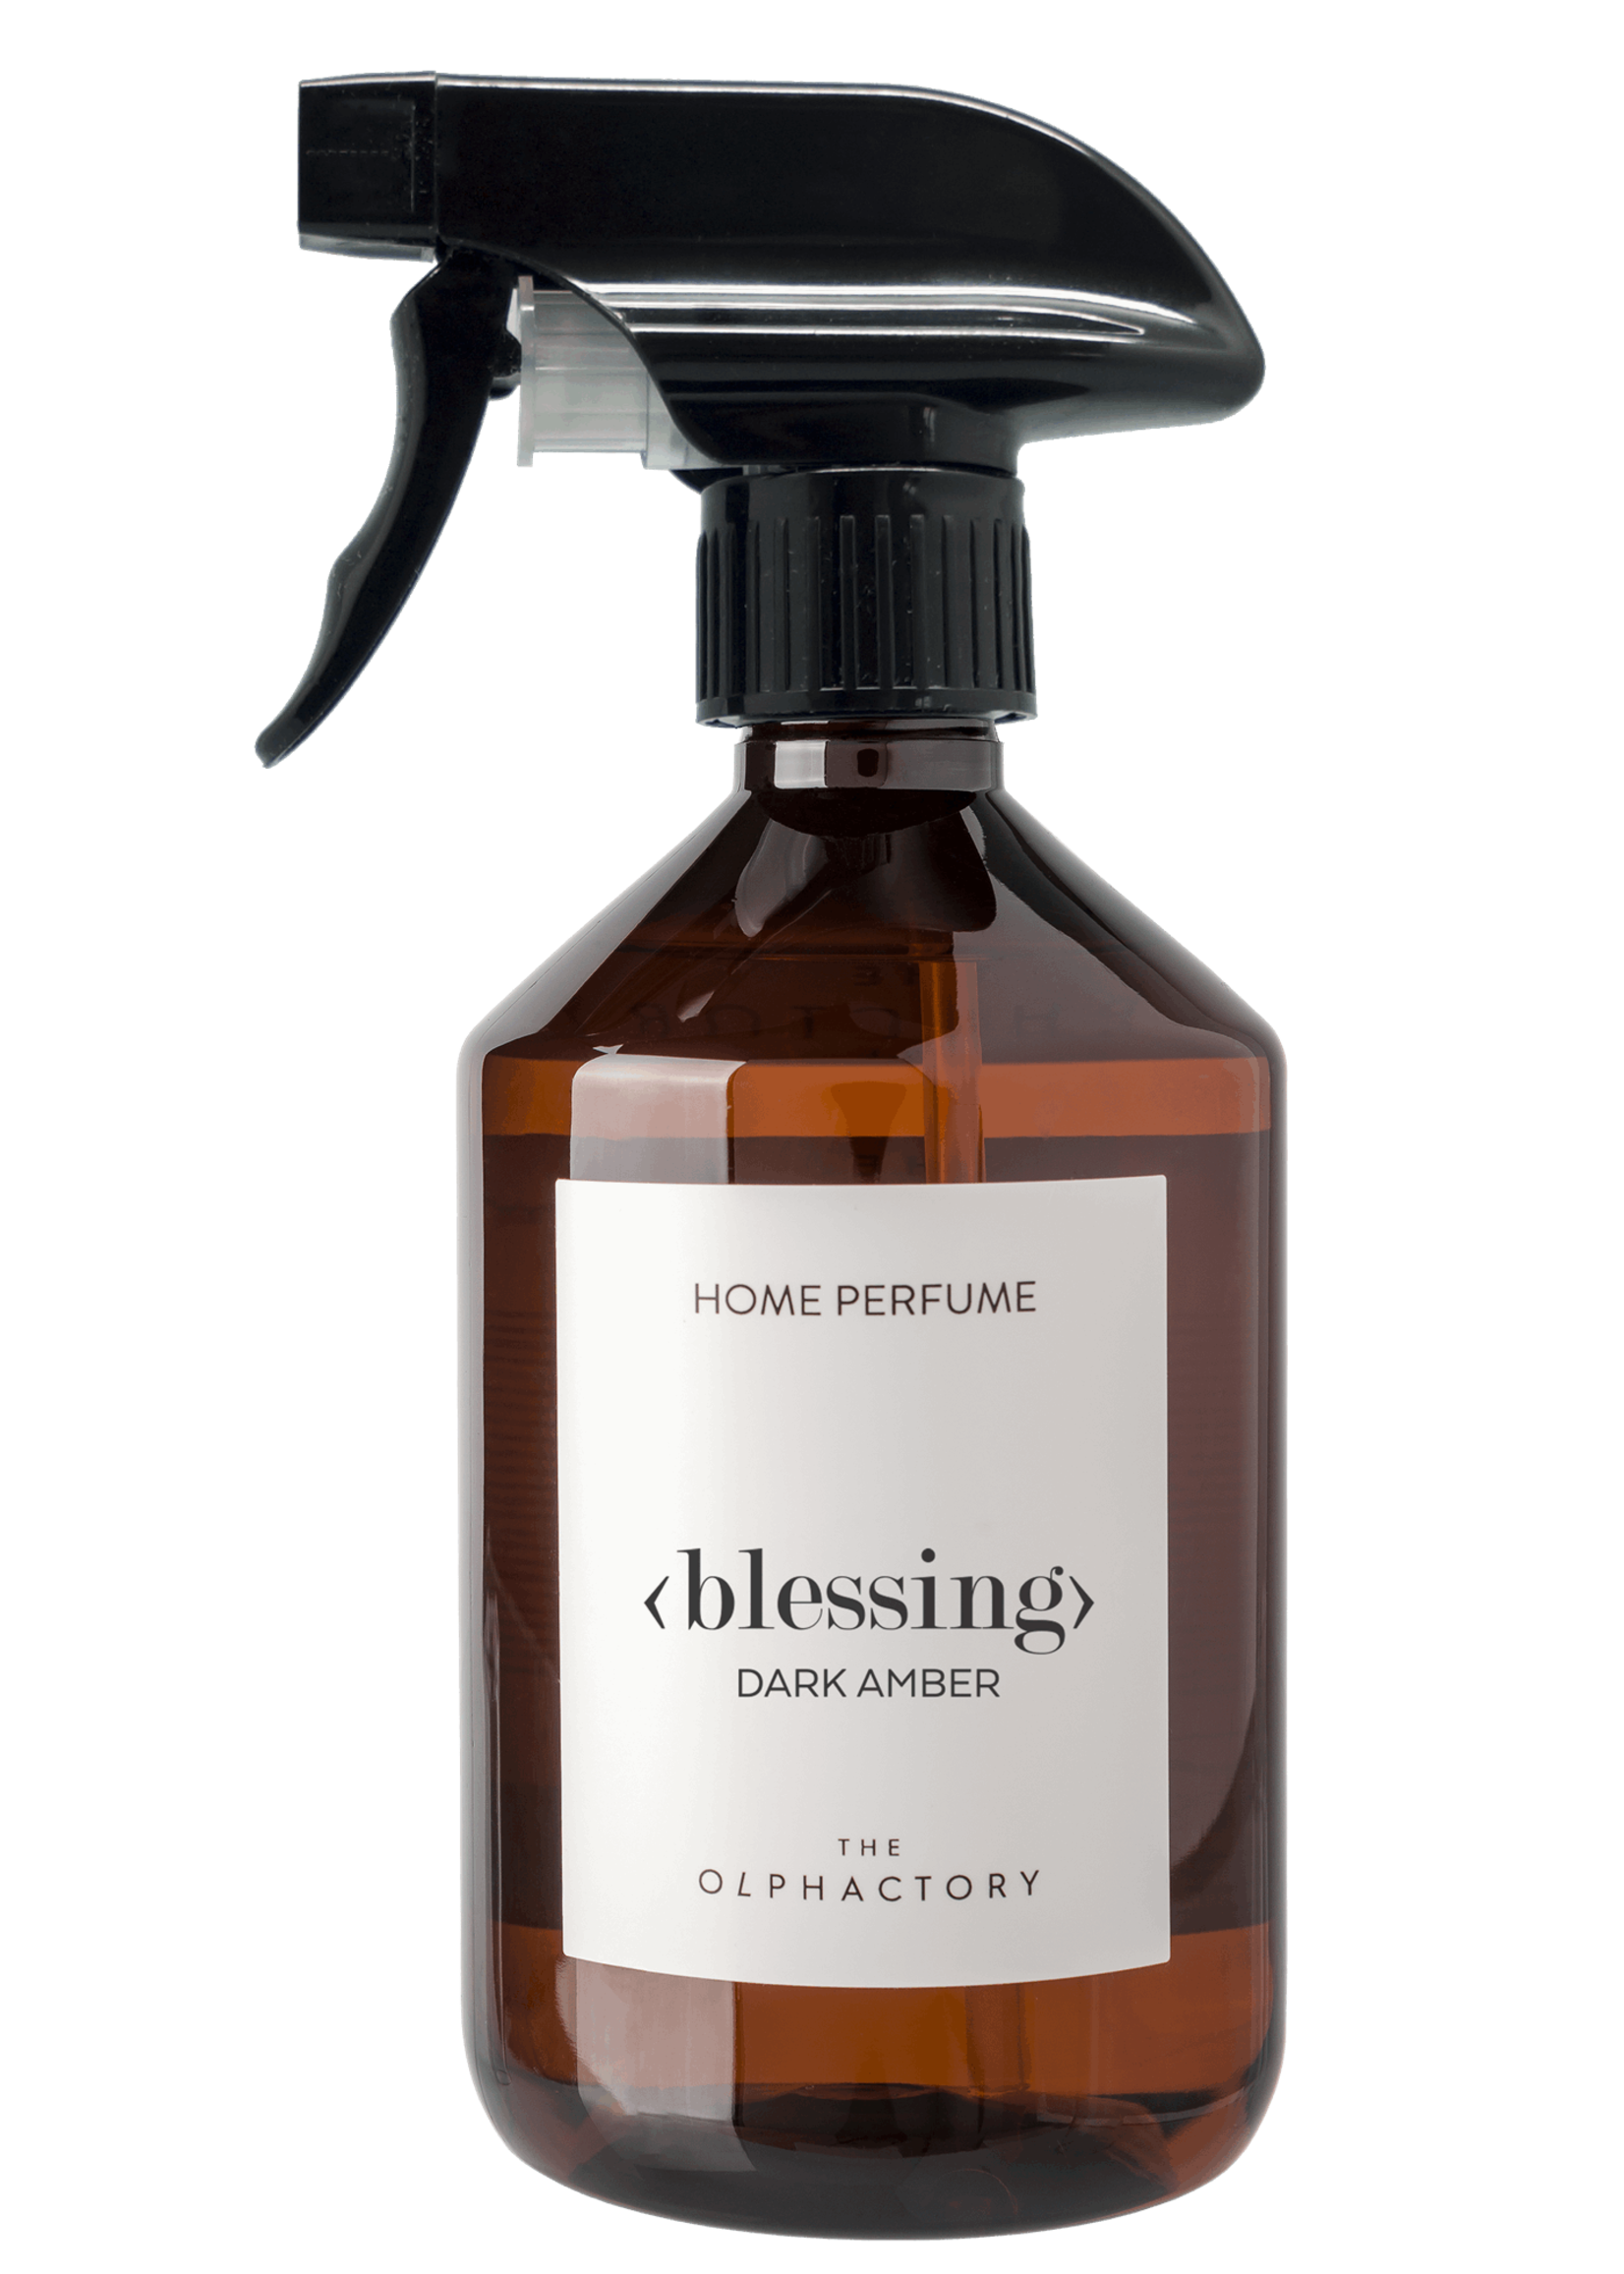 The Olphactory The Olphactory - Home Perfume - Blessing